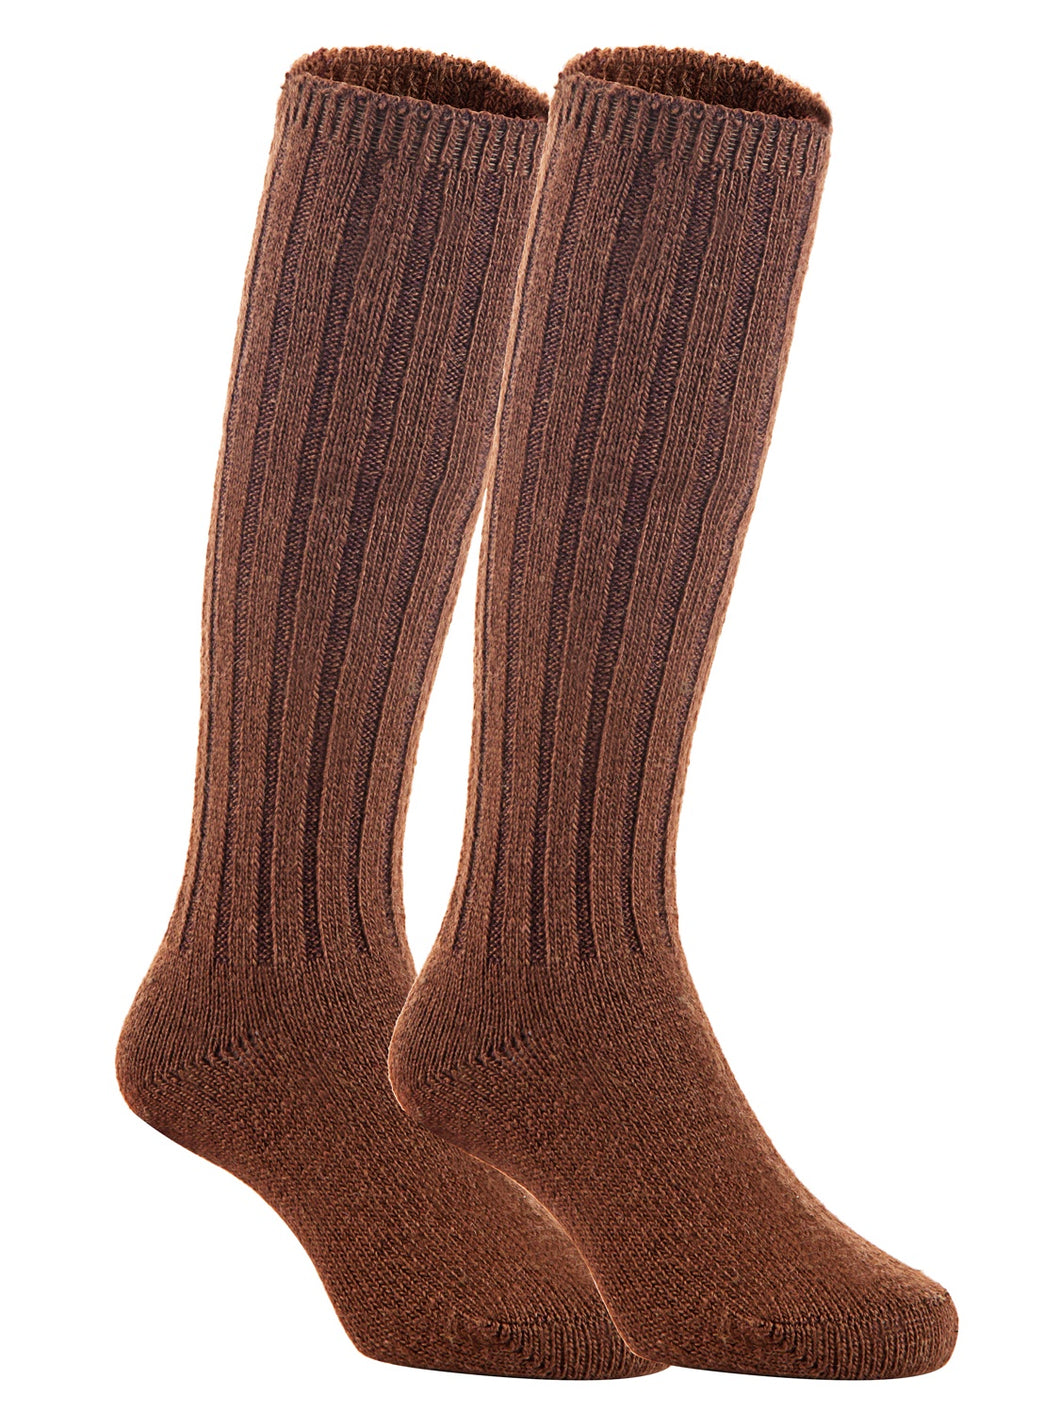 Lian Style Unisex Baby Children 4 Pairs Knee-high Wool Boot Blend Boot Socks Size 4-6Y(Coffee)